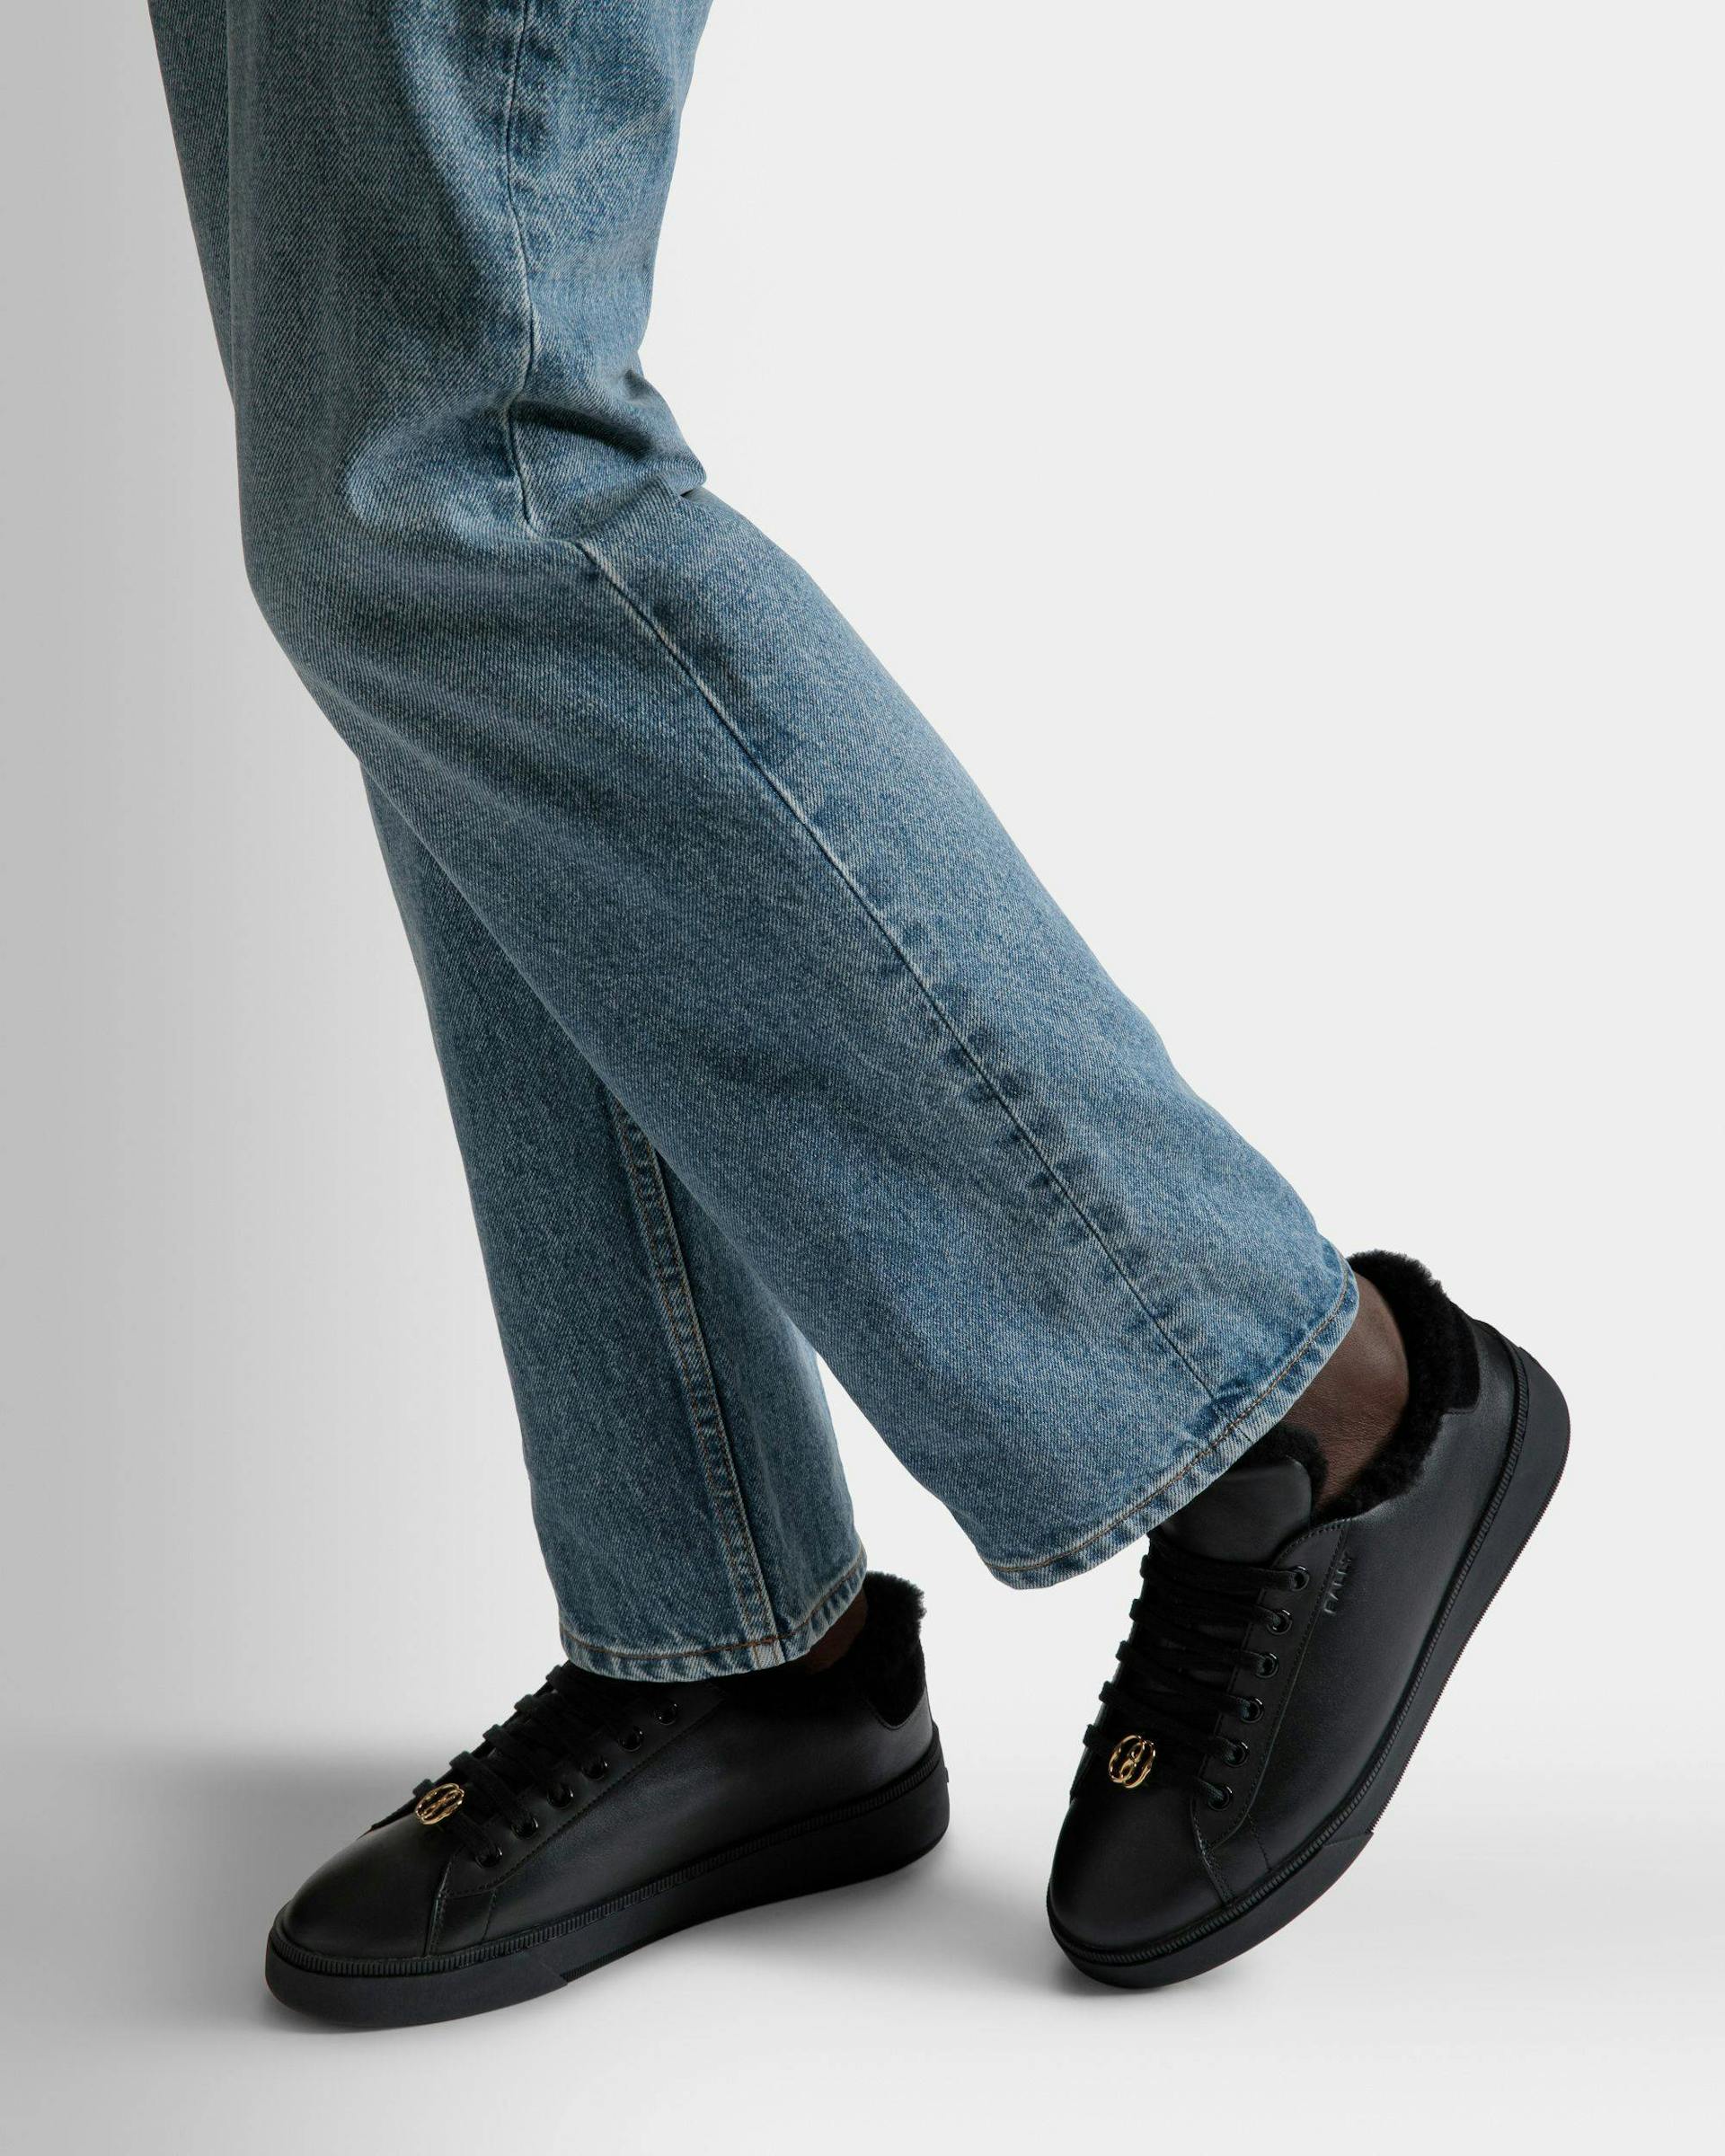 Men's Raise Sneakers In Black Leather | Bally | On Model Close Up